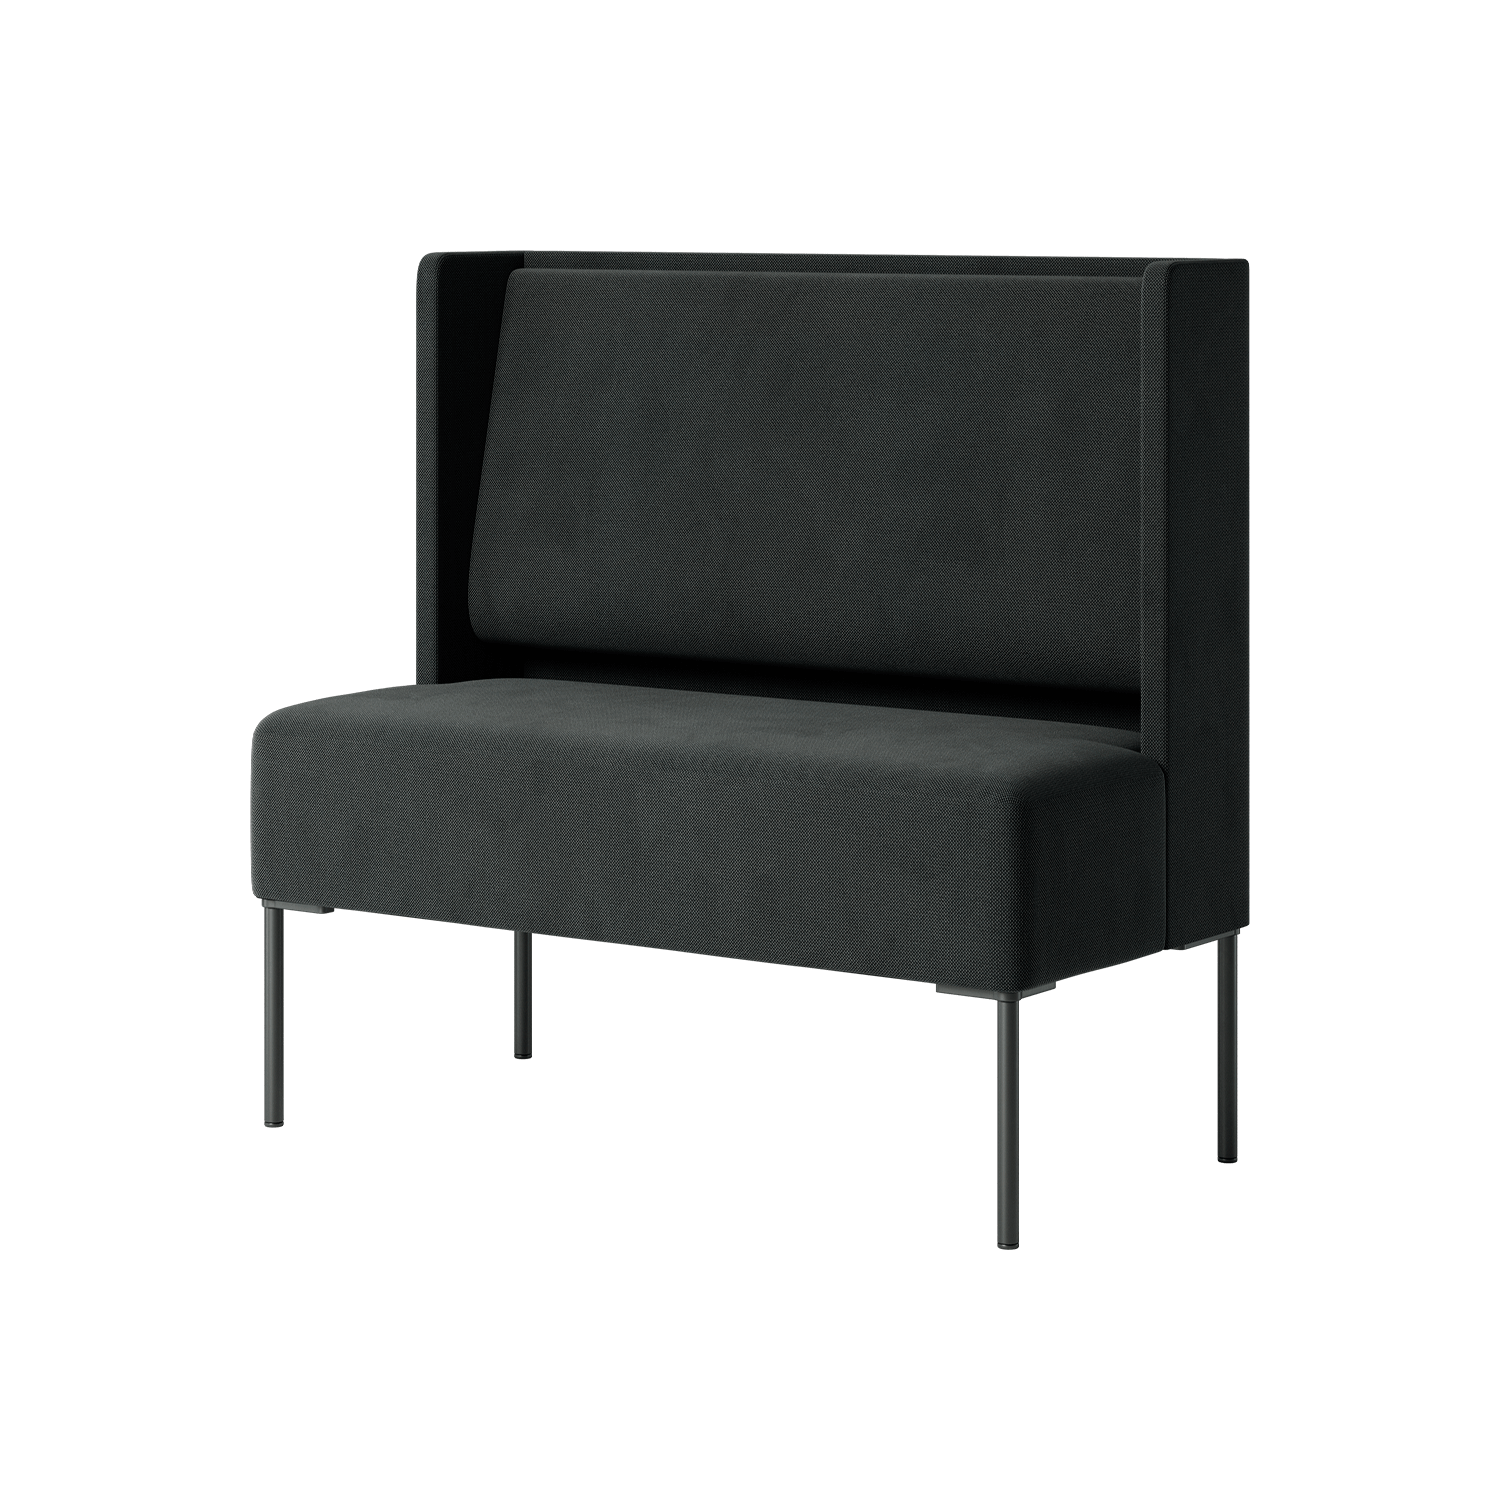 A black sofa with a black frame and a black seat.